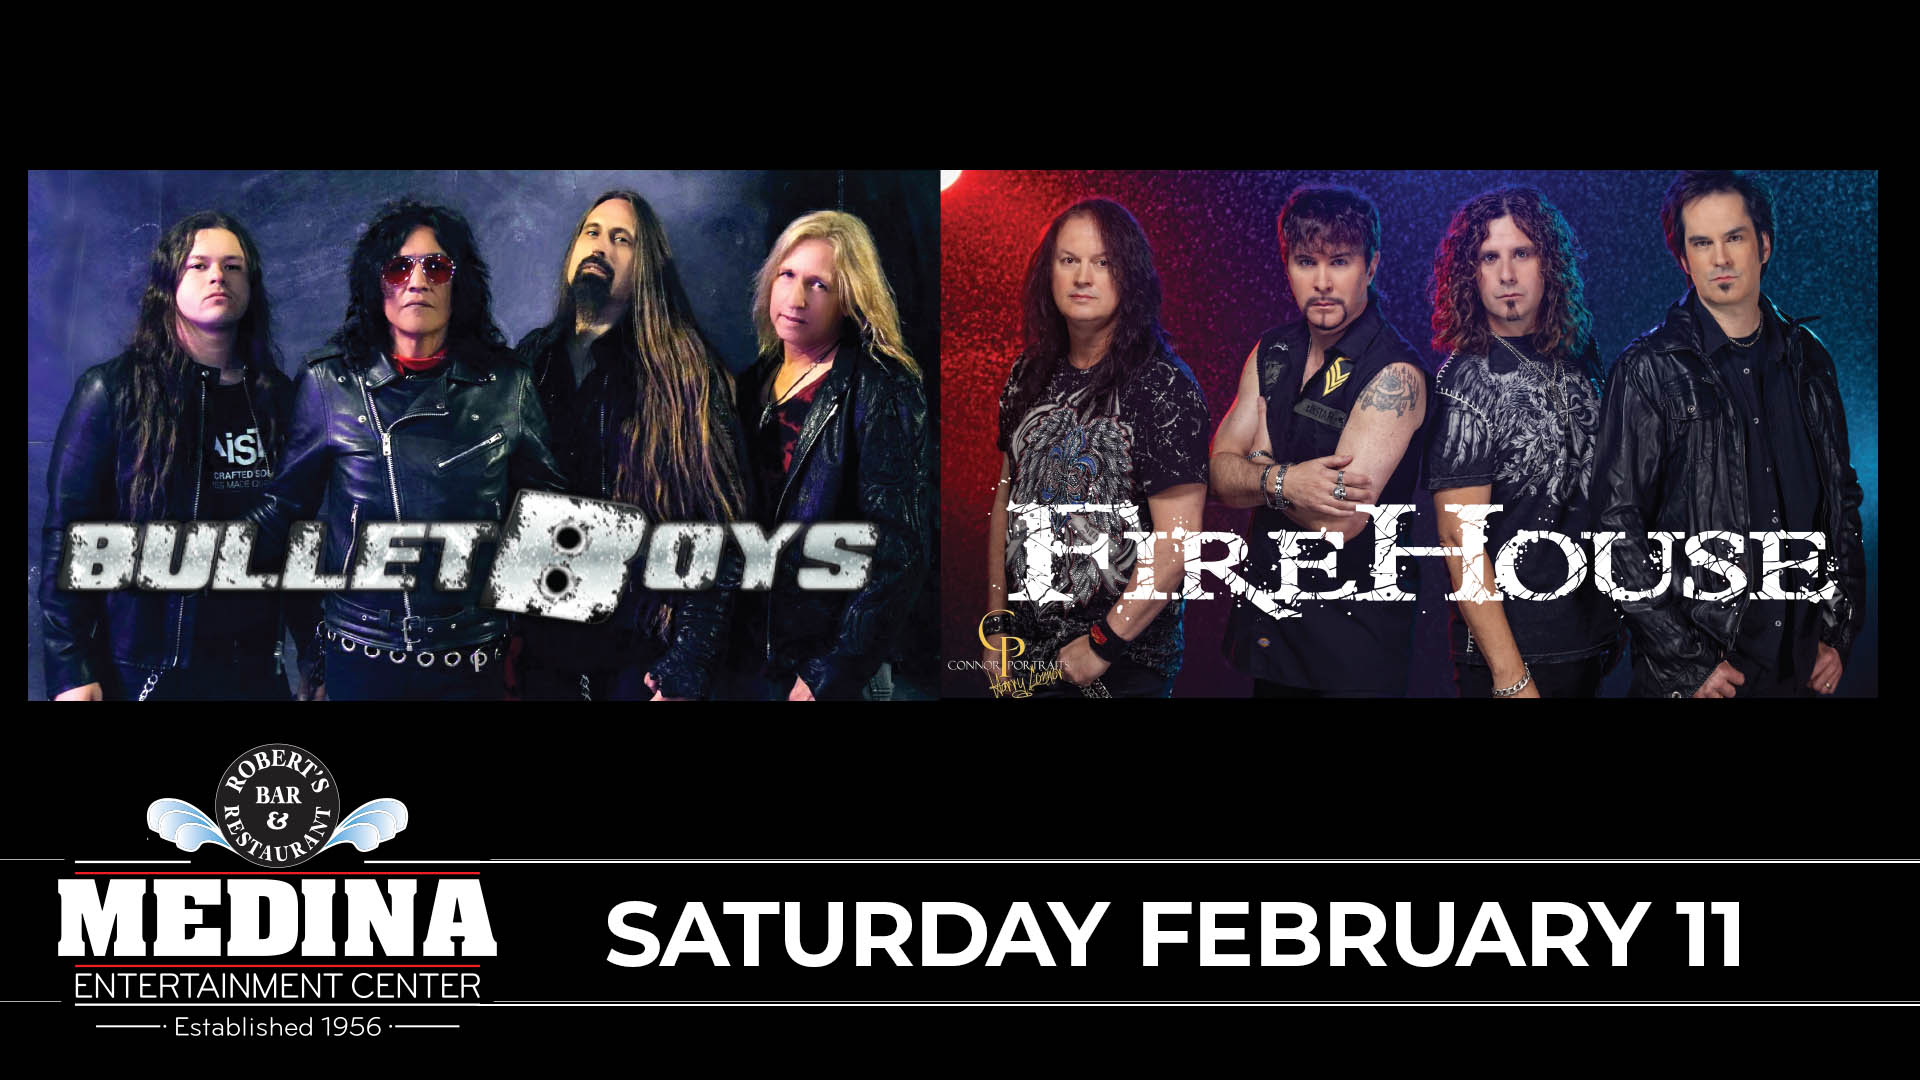 Bulletboys / Firehouse Medina Entertainment Center Saturday, February 11th, 2023 Doors: 7:00PM | Music: 8:00PM | 21+ Ticket Prices: $47.00 (Gold Seating), $41.00 (Silver Seating) & $35.00 (GA Seating) plus applicable fees